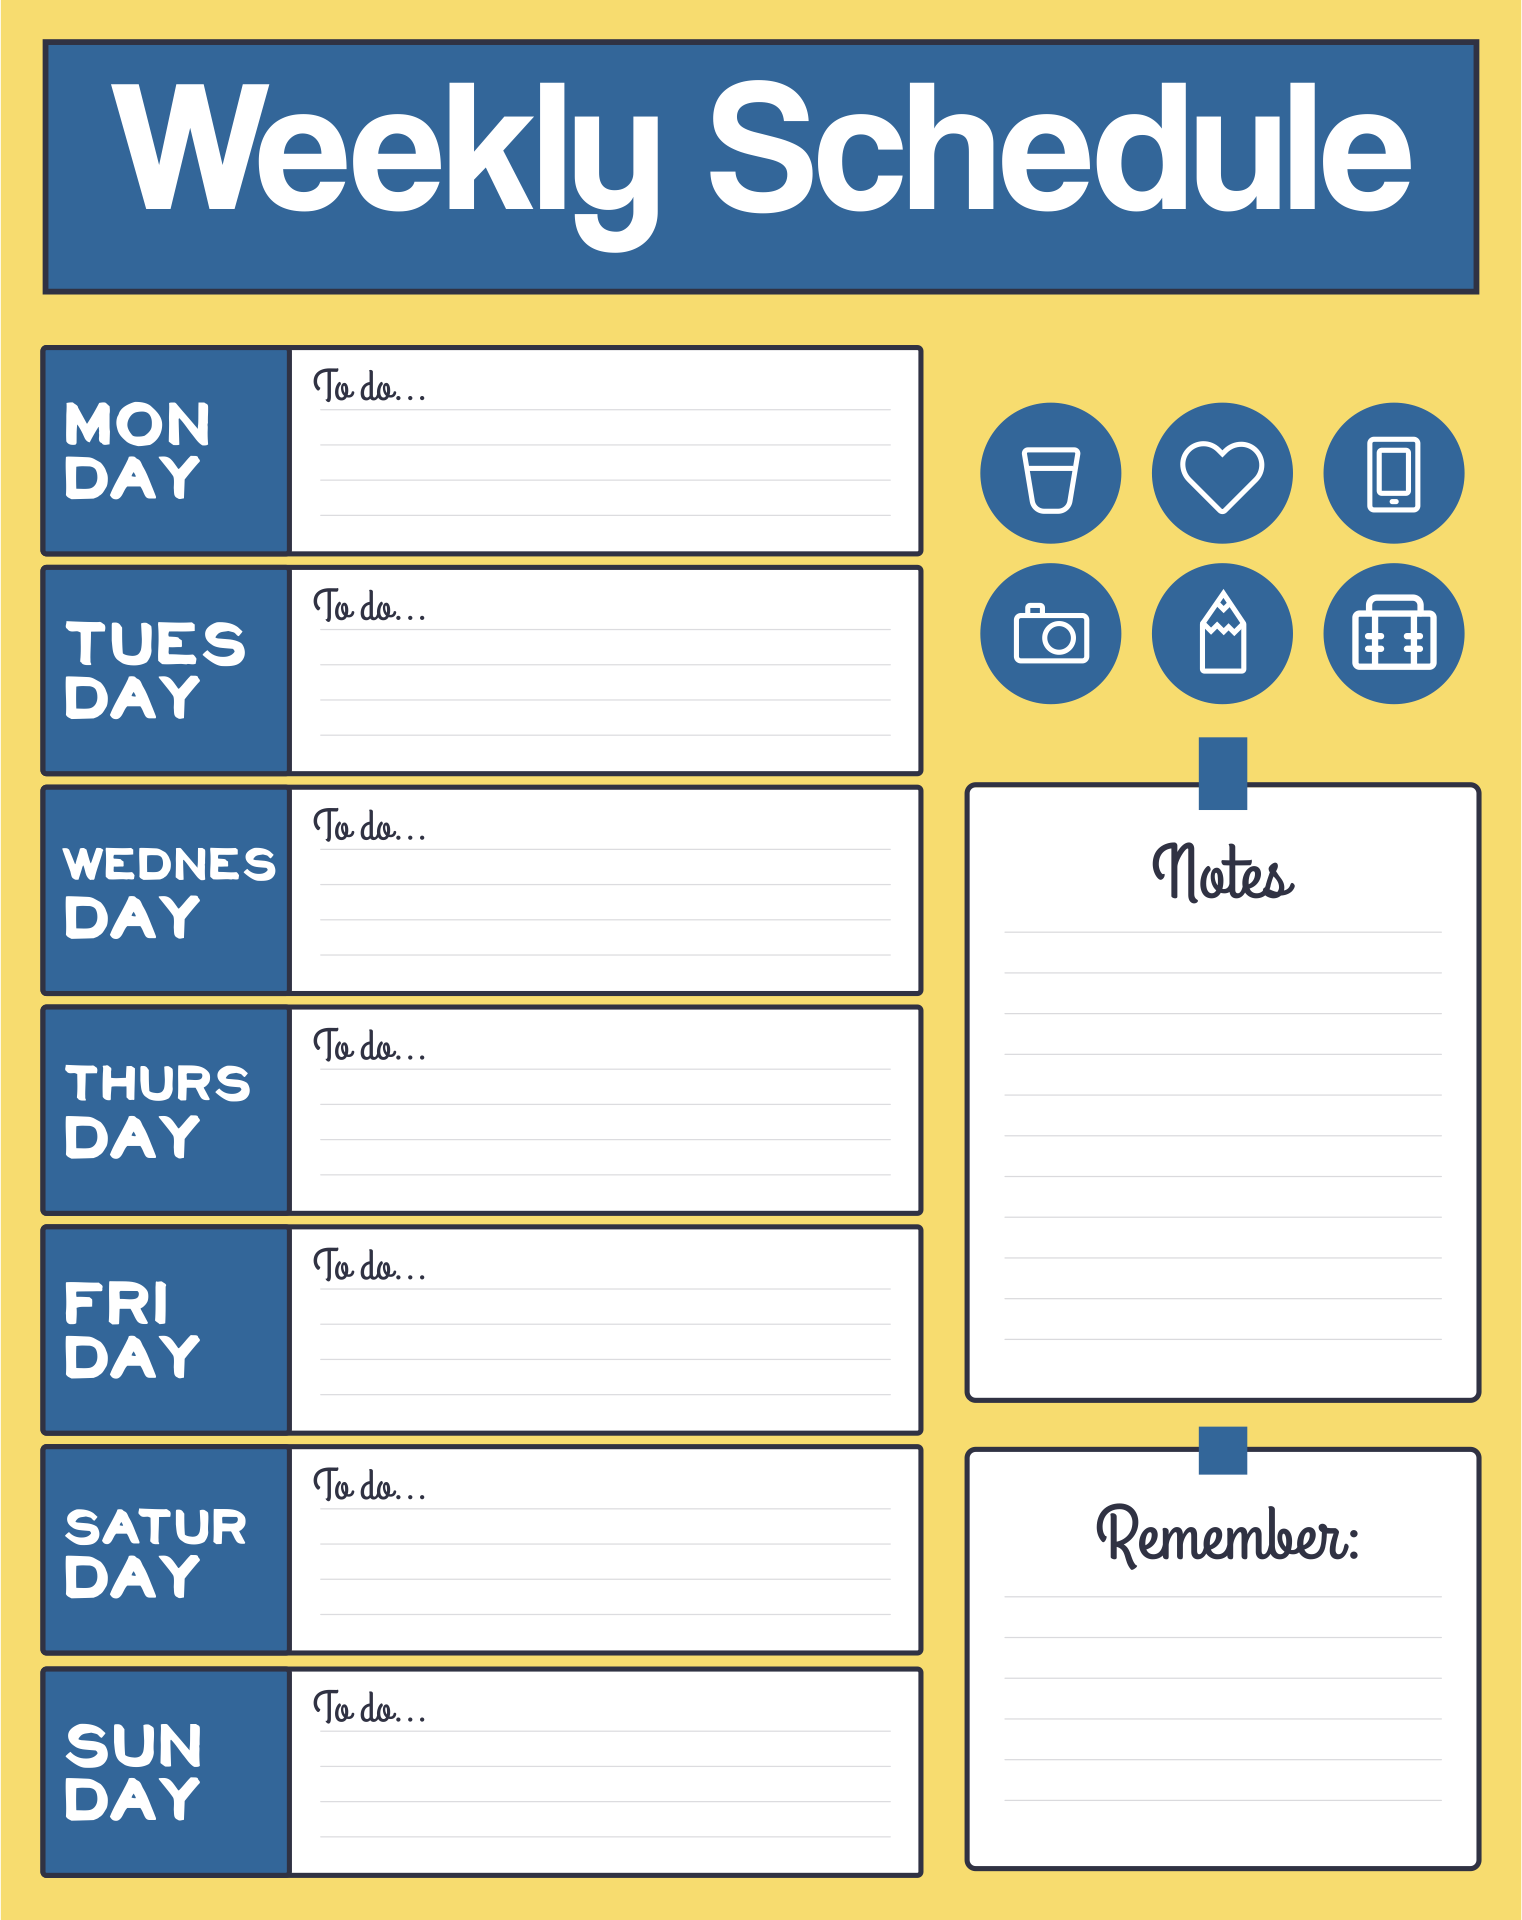 blank-schedule-schedule-printable-images-gallery-category-page-1